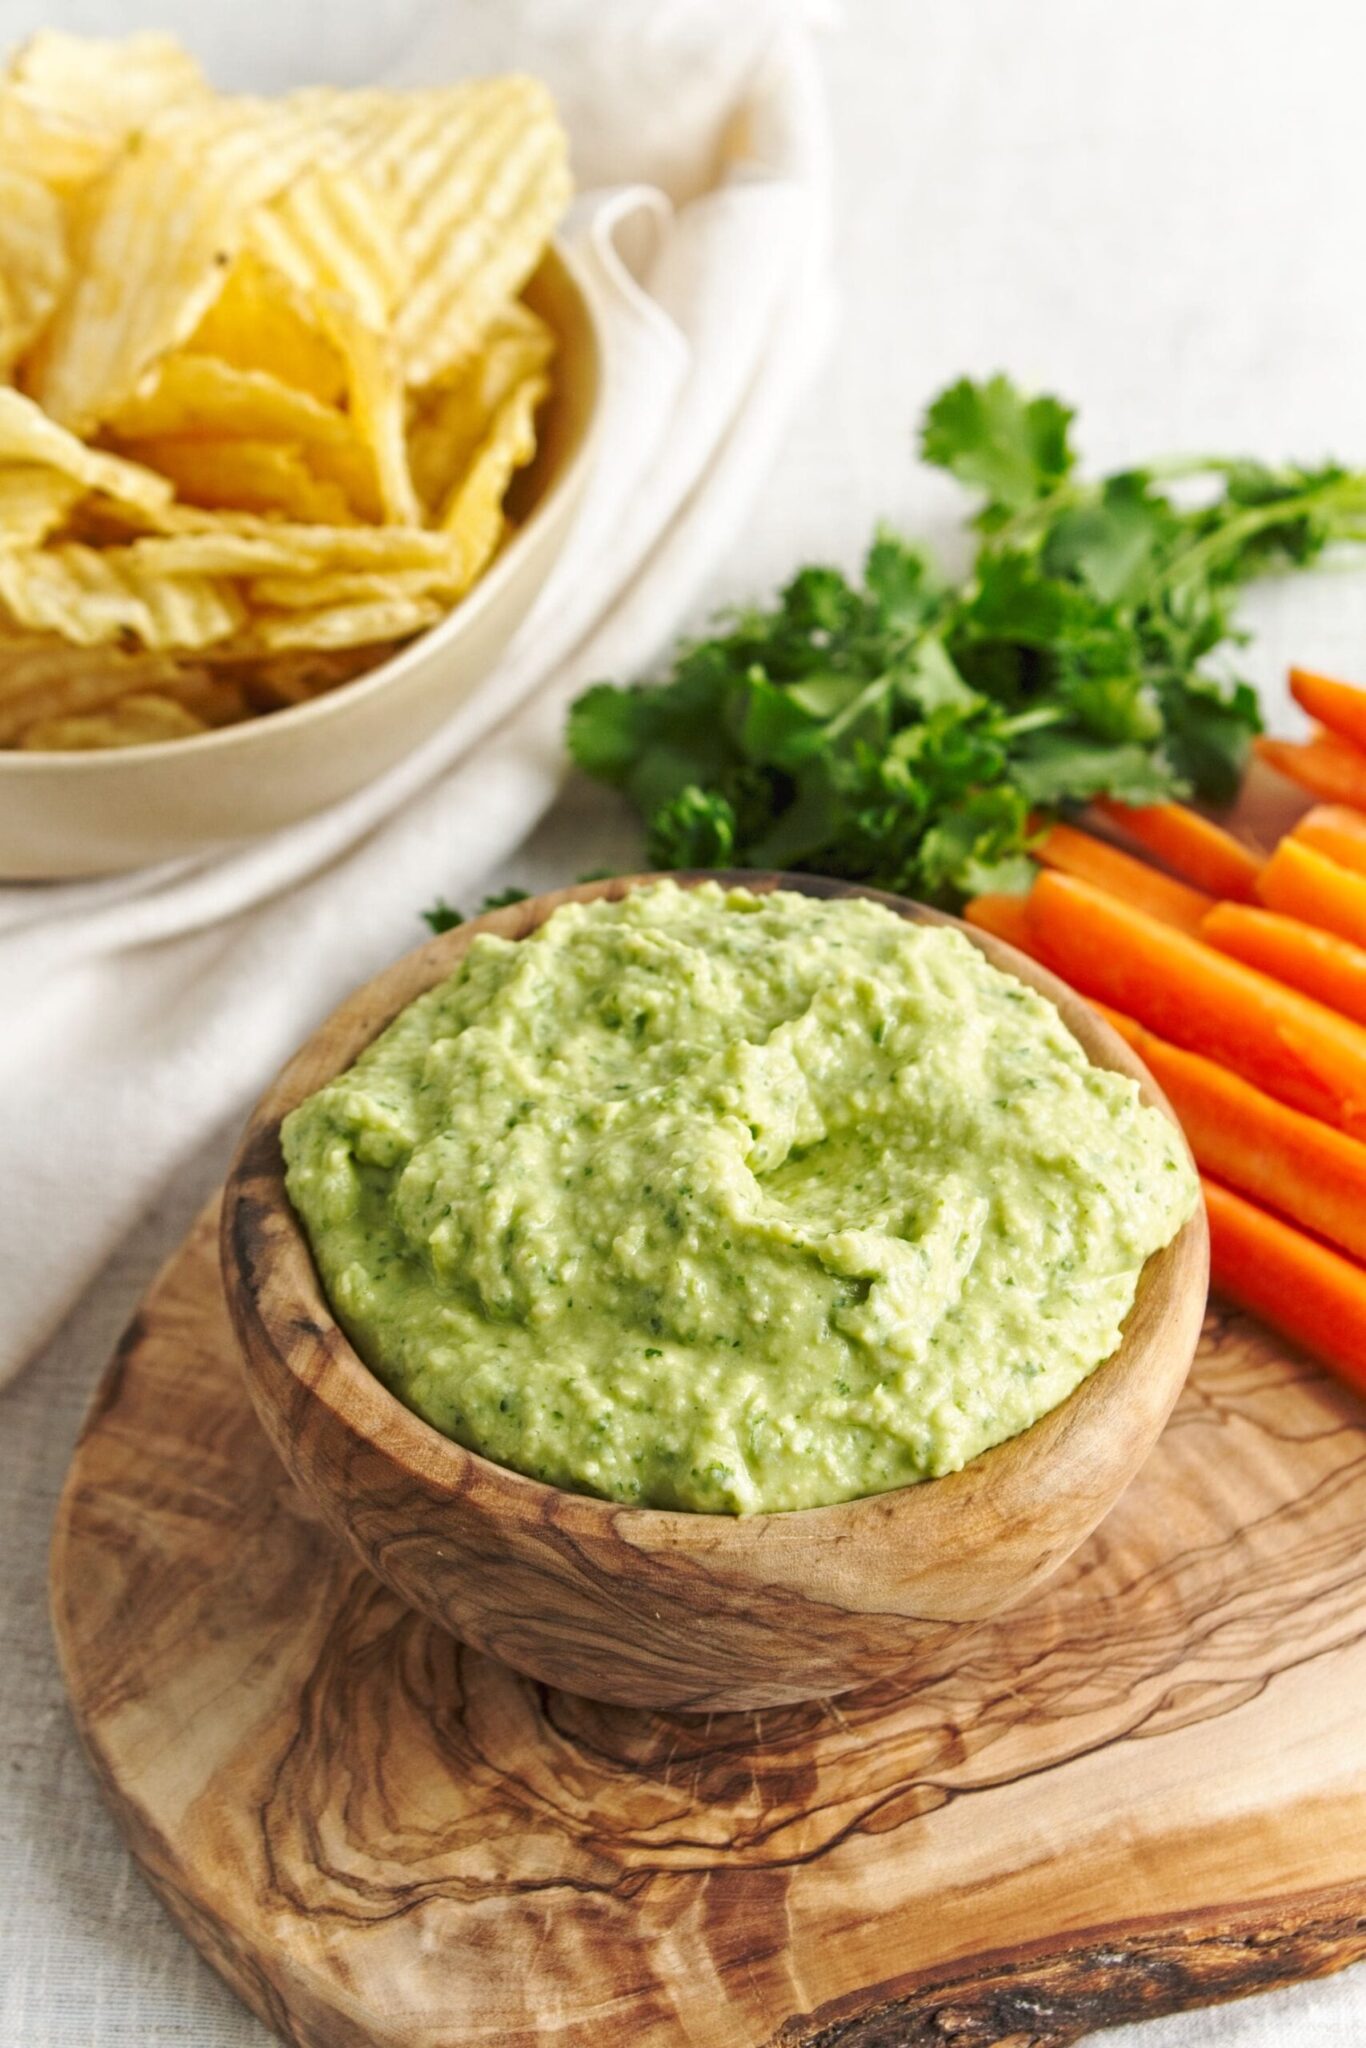 Green Goddess Hummus served in a wooden bowl